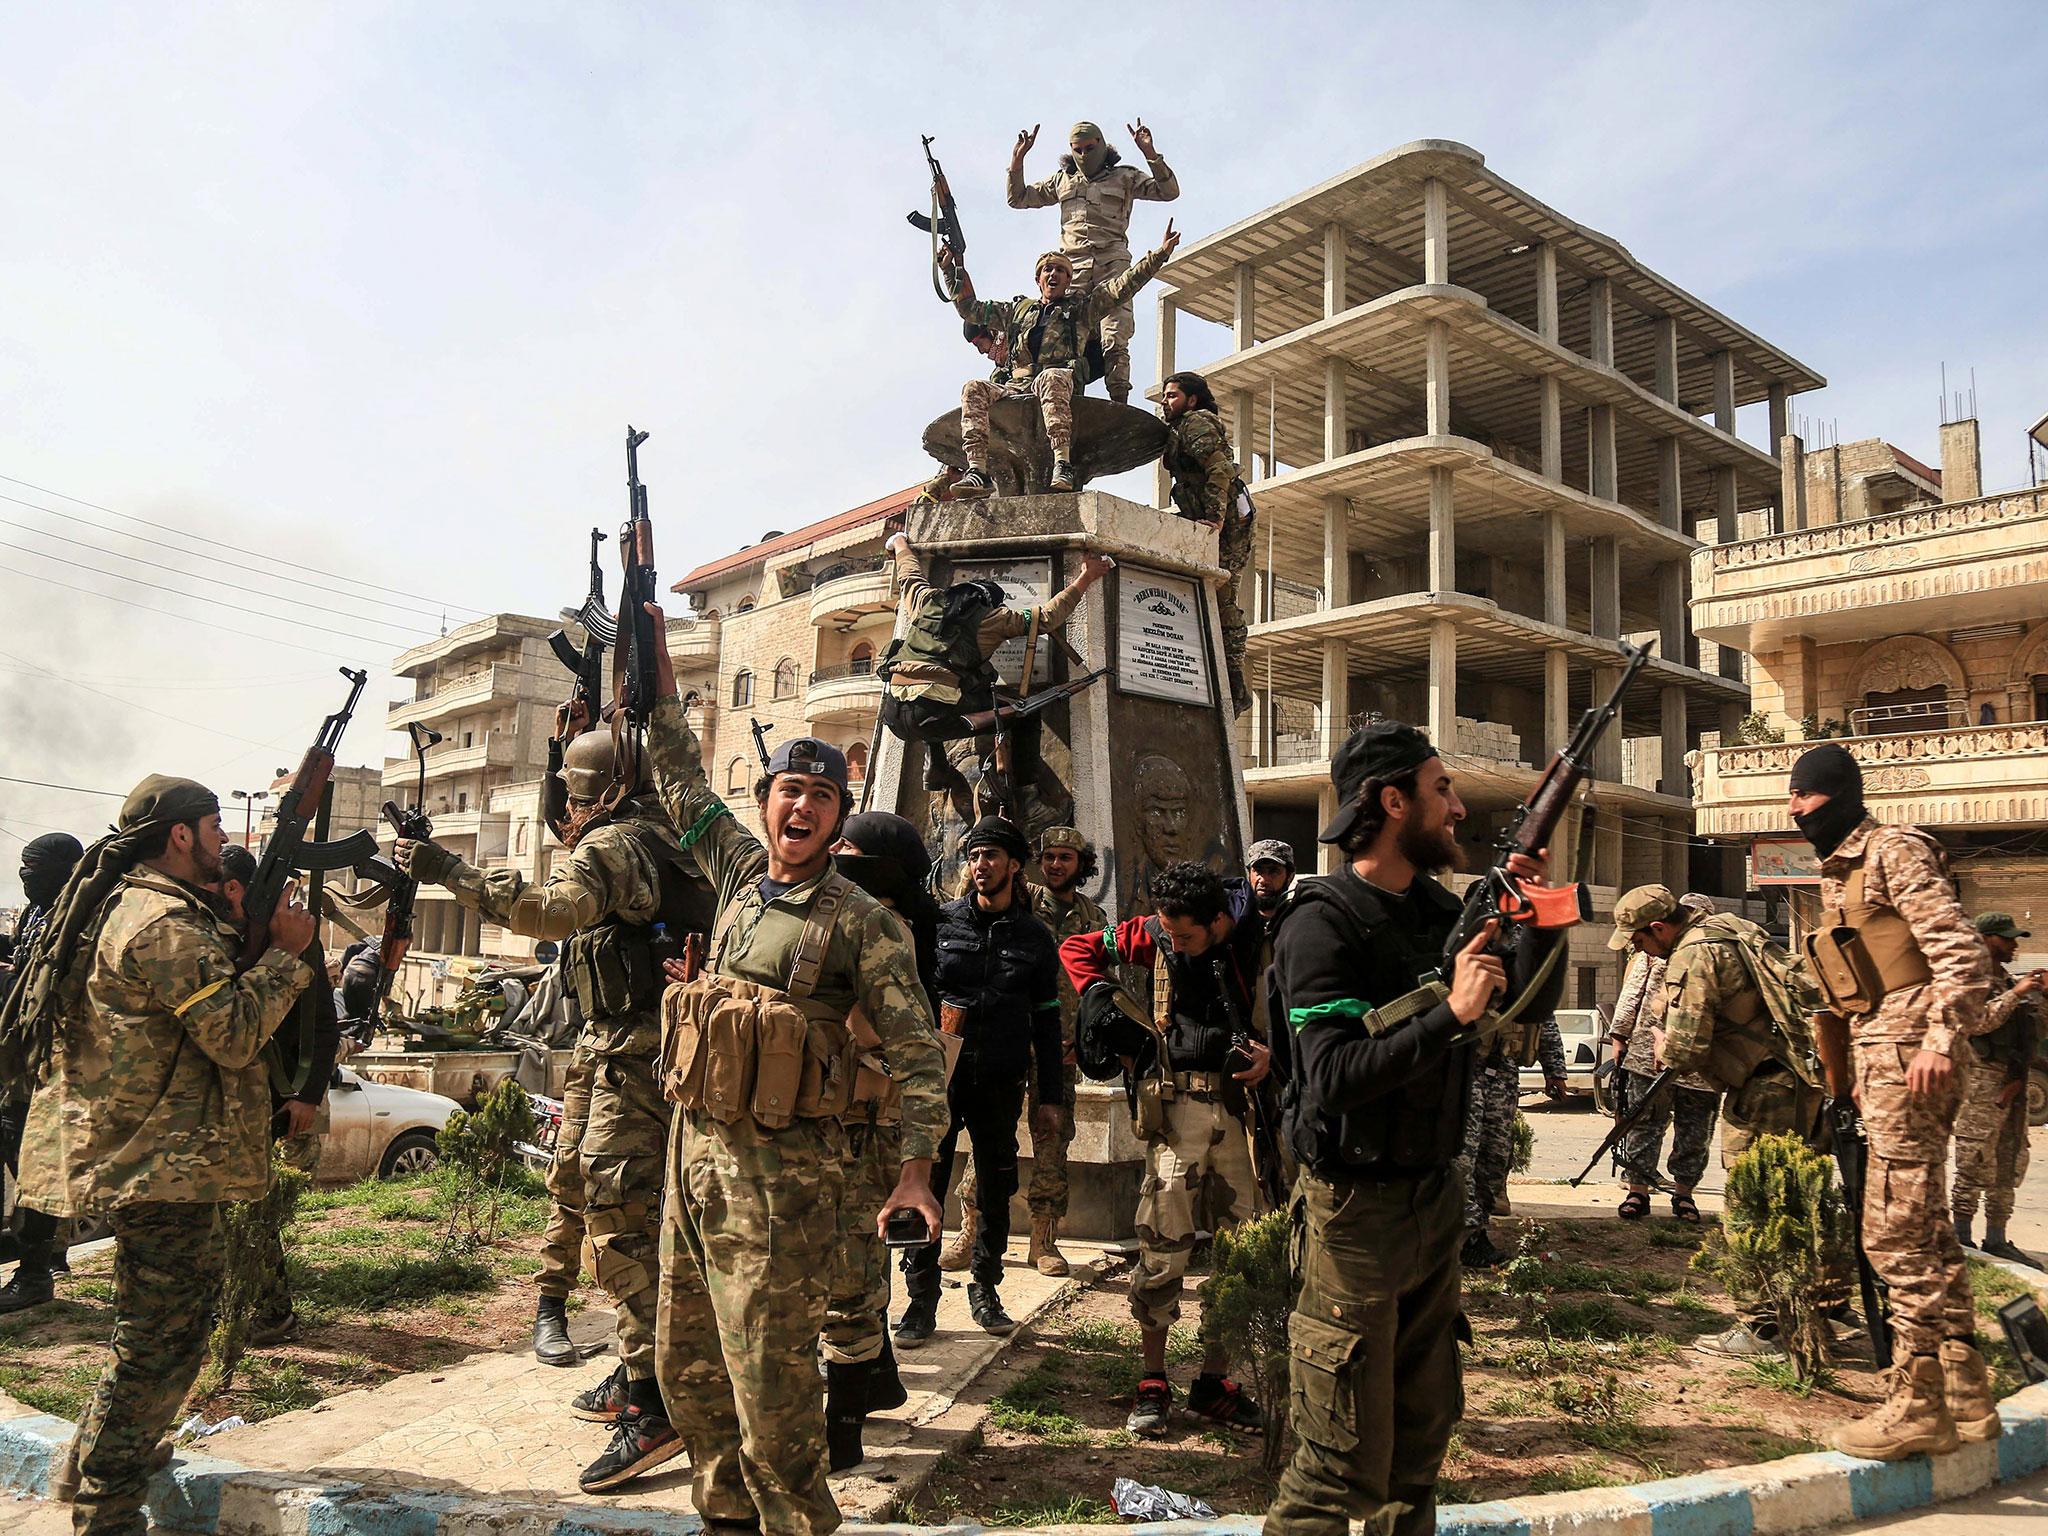 Turkish forces seize control of Syrian town of Afrin and celebrate by tearing down statue of Kurdish hero | The Independent